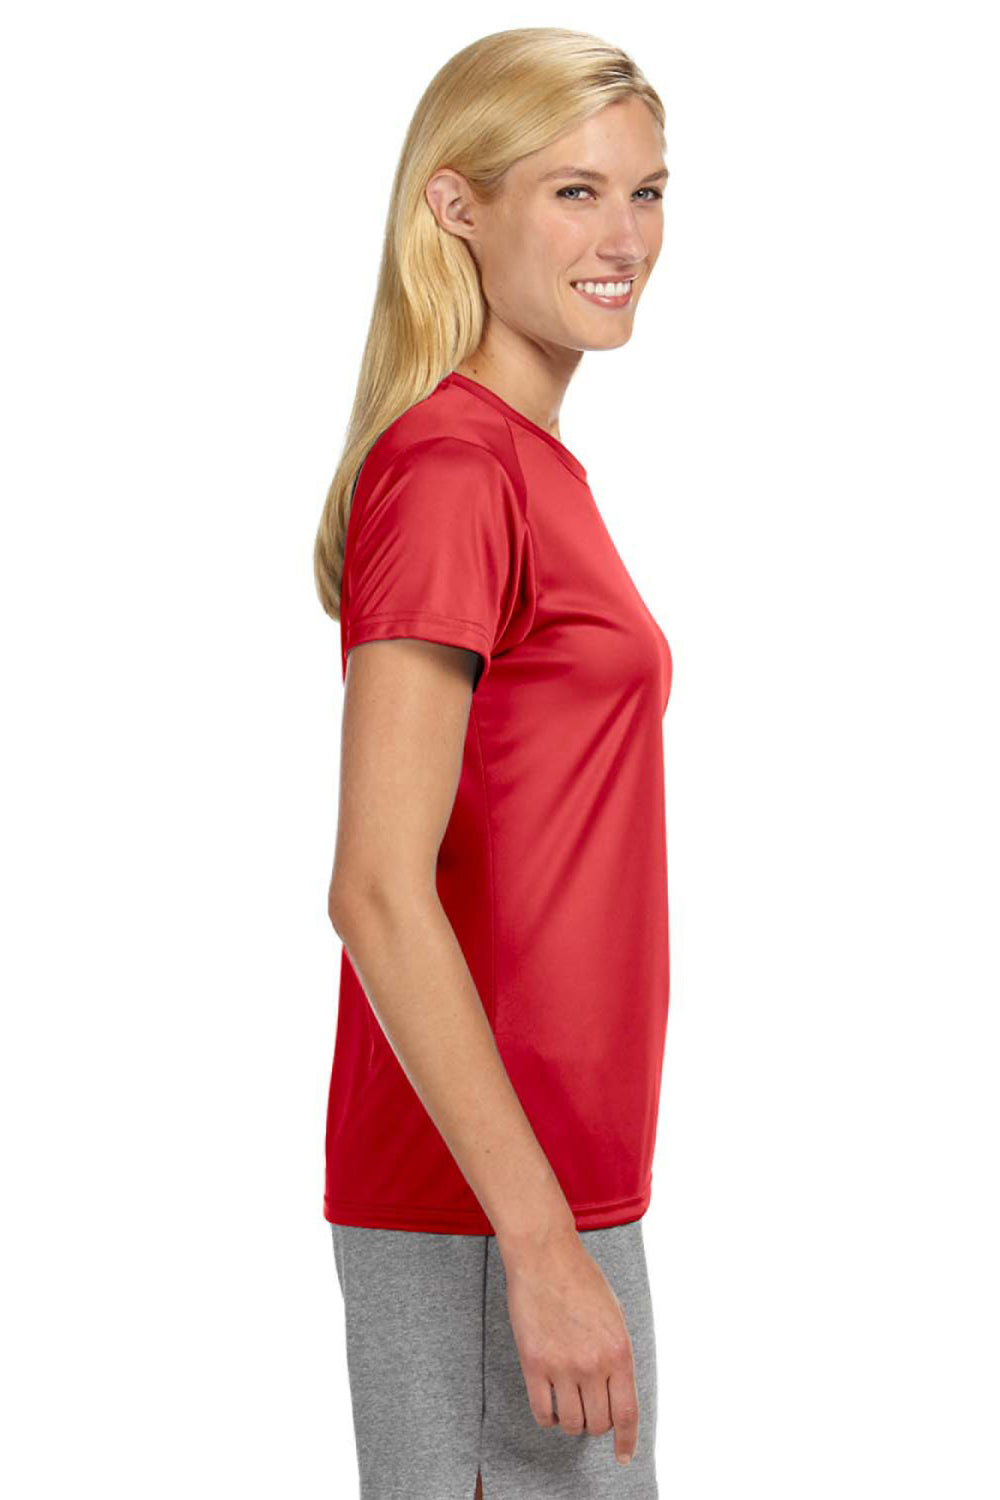 A4 NW3201 Womens Performance Moisture Wicking Short Sleeve Crewneck T-Shirt Scarlet Red Model Side